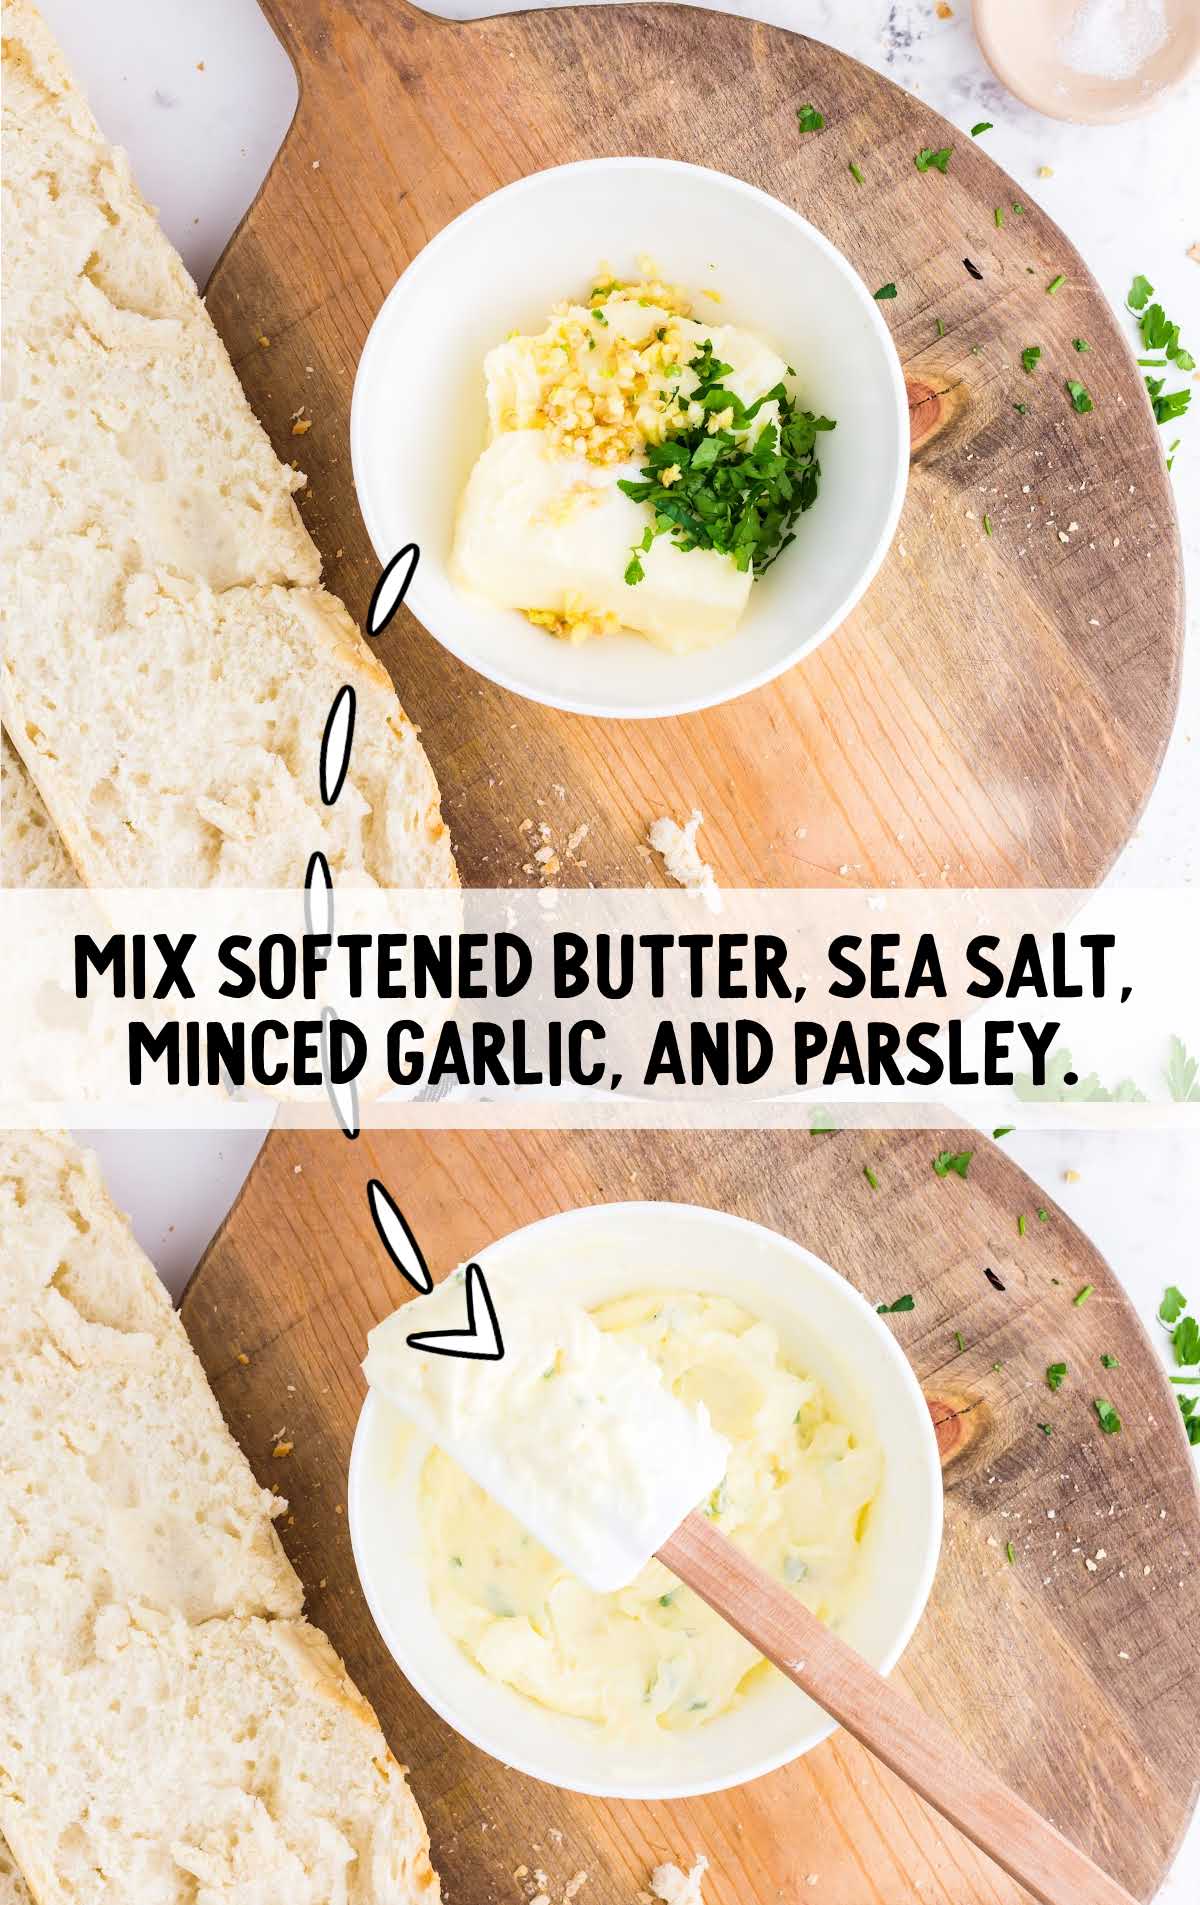 butter, sea salt, minced garlic, and parsley being combined in a bowl